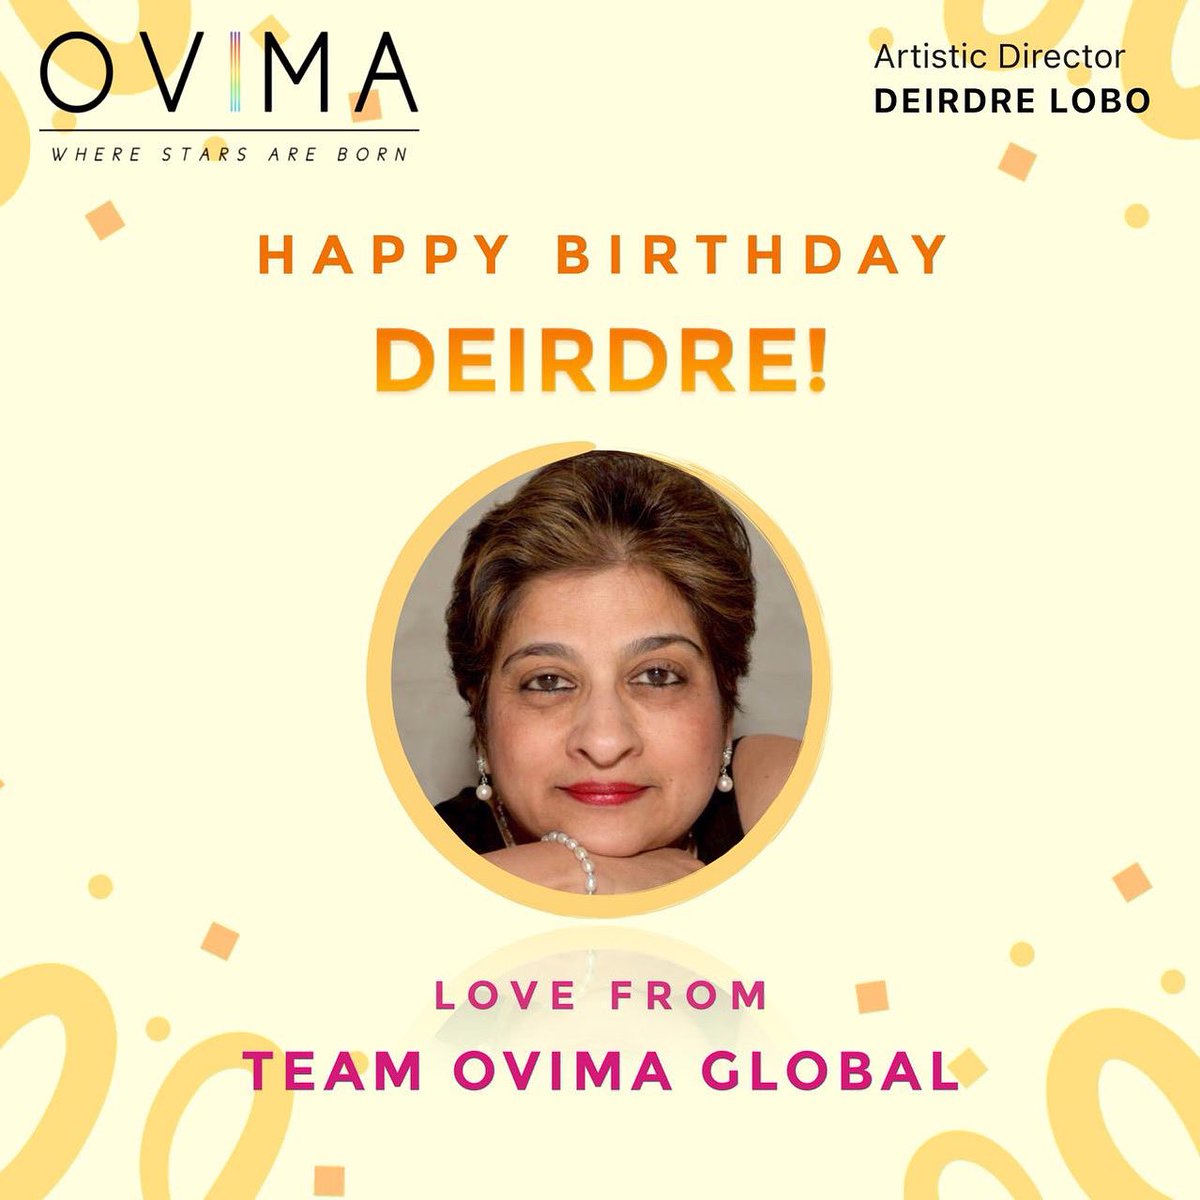 Happy Birthday to our Artistic Director, Deirdre Lobo 💖 Sending you the warmest greetings on your birthday!
Best Wishes from your Students, Parents & Team OVIMA✨

#birthday #happybirthday #love #party #celebration #vocalcoach #singer #music #singinglessons #voicelessons